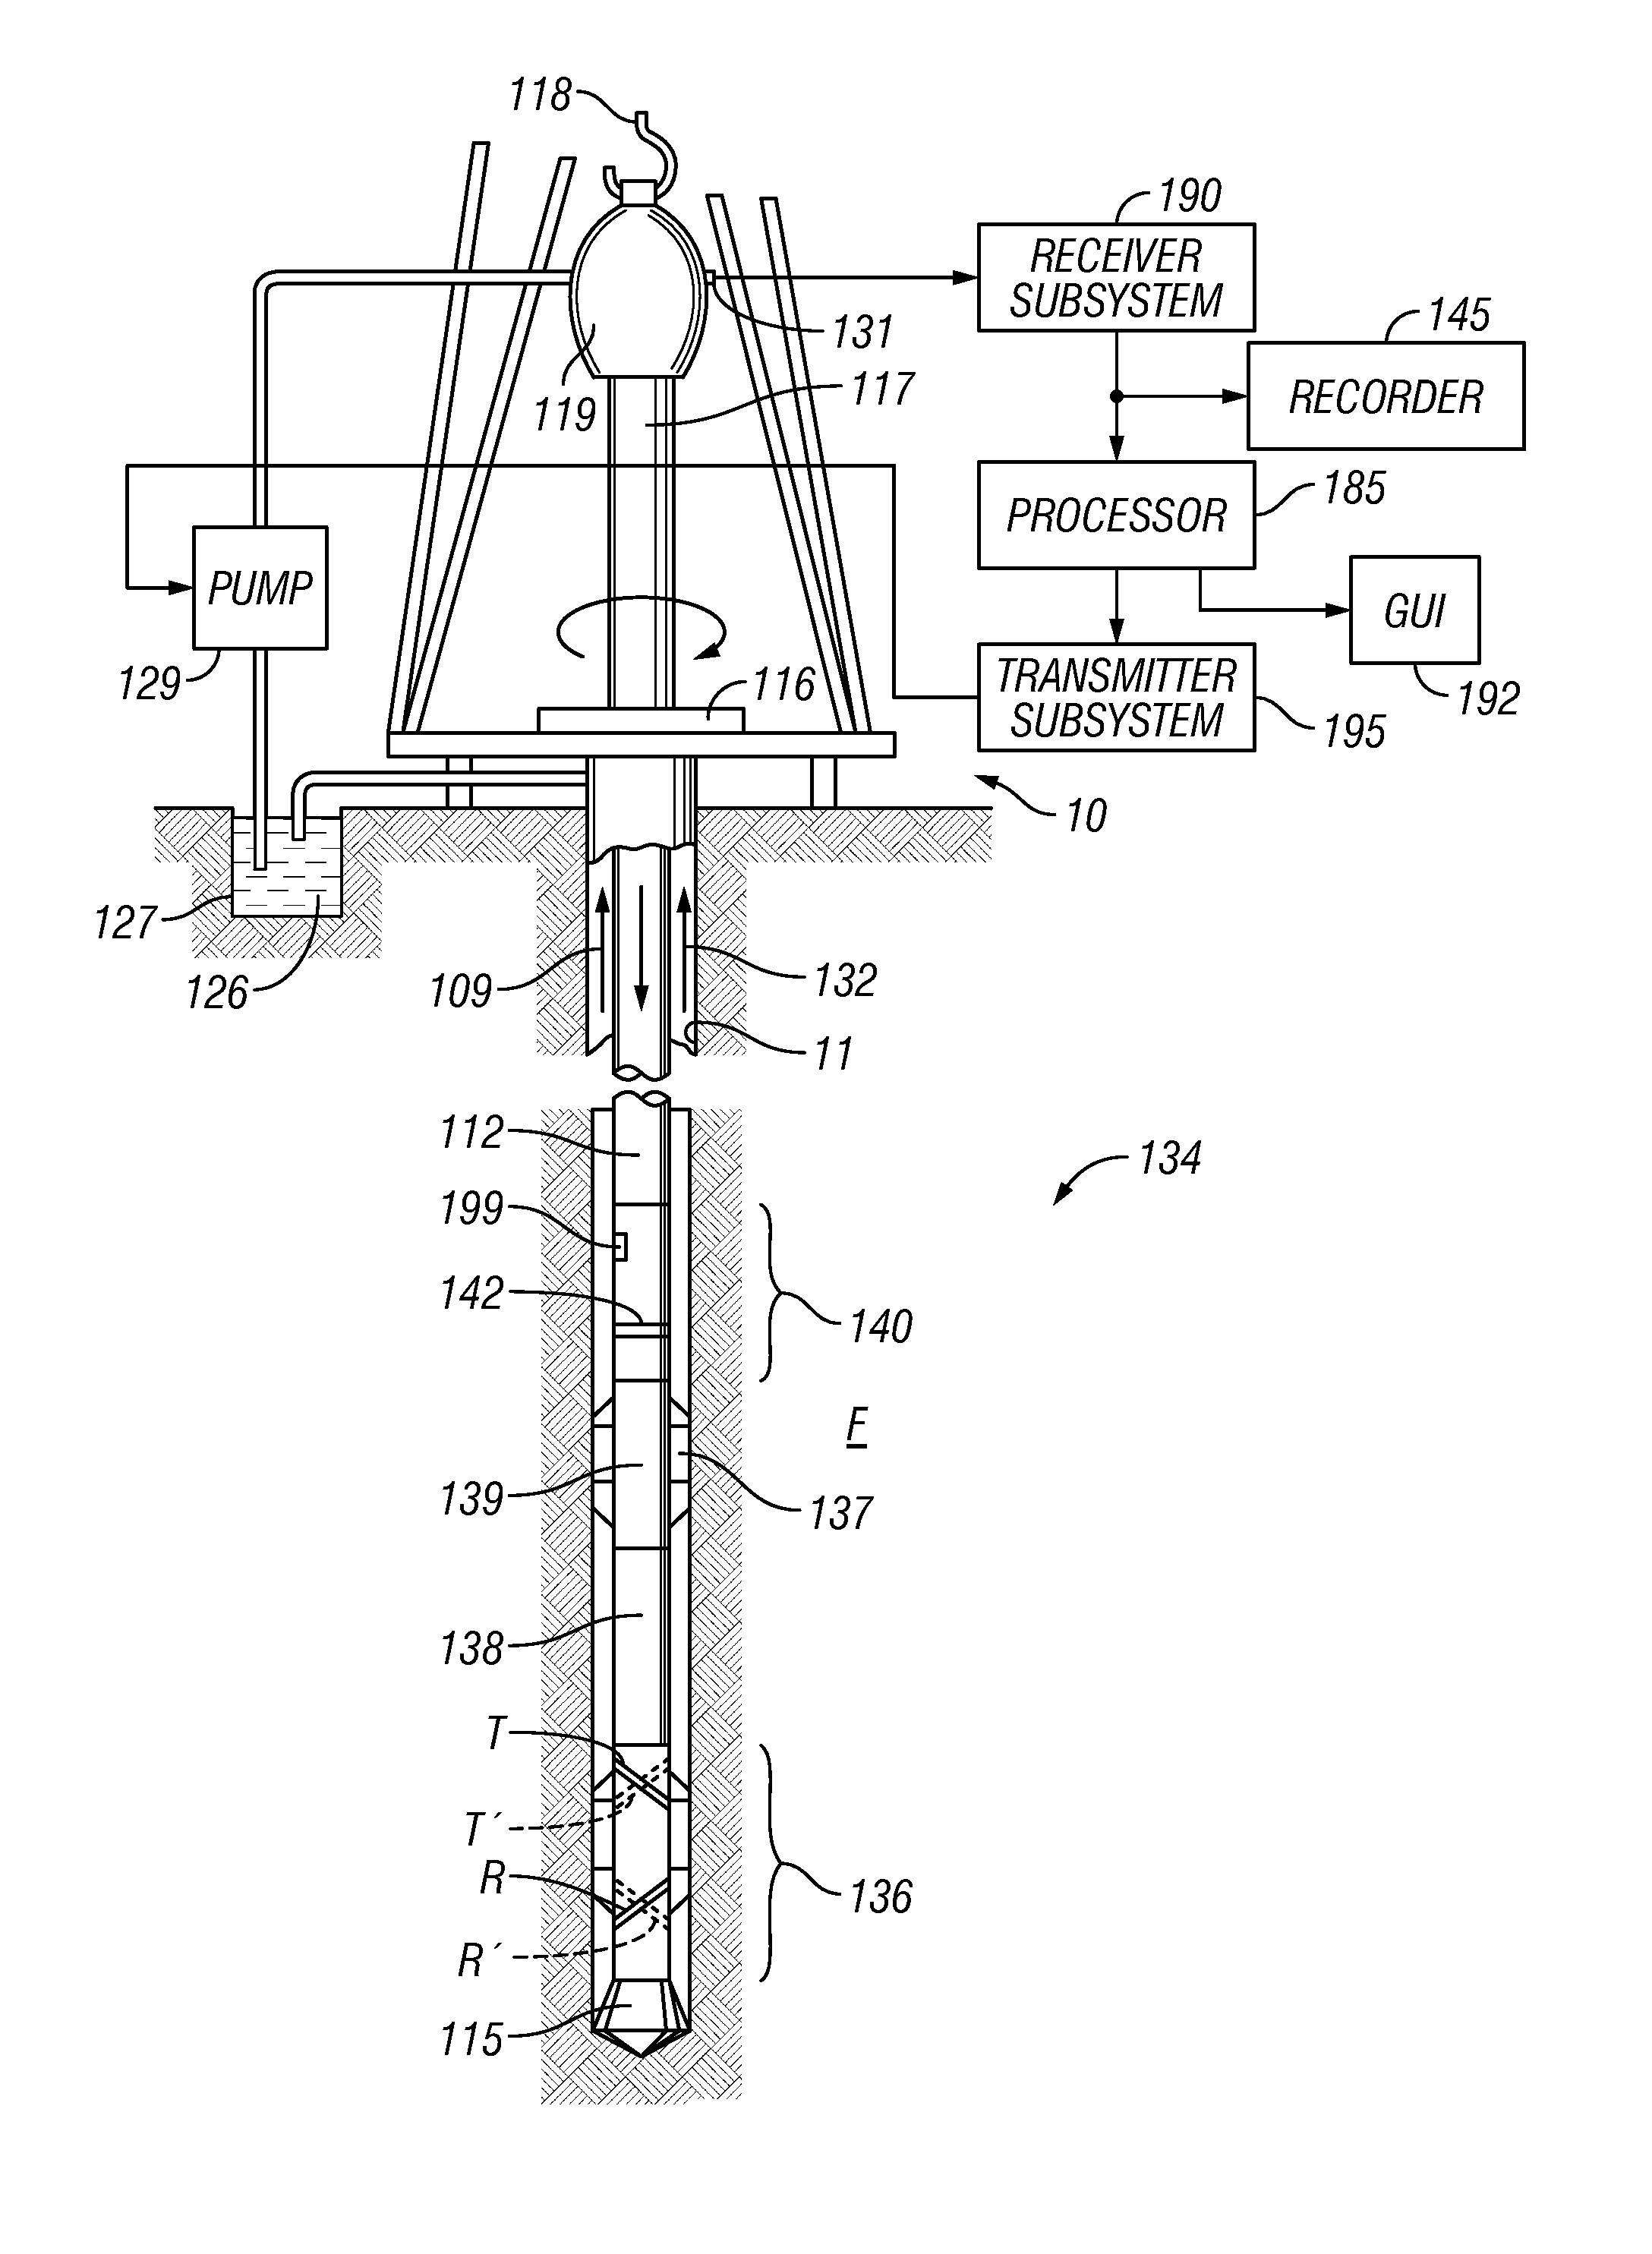 Method for determining stratigraphic position of a wellbore during driling using color scale interpretation of strata and its application to wellbore construction operations